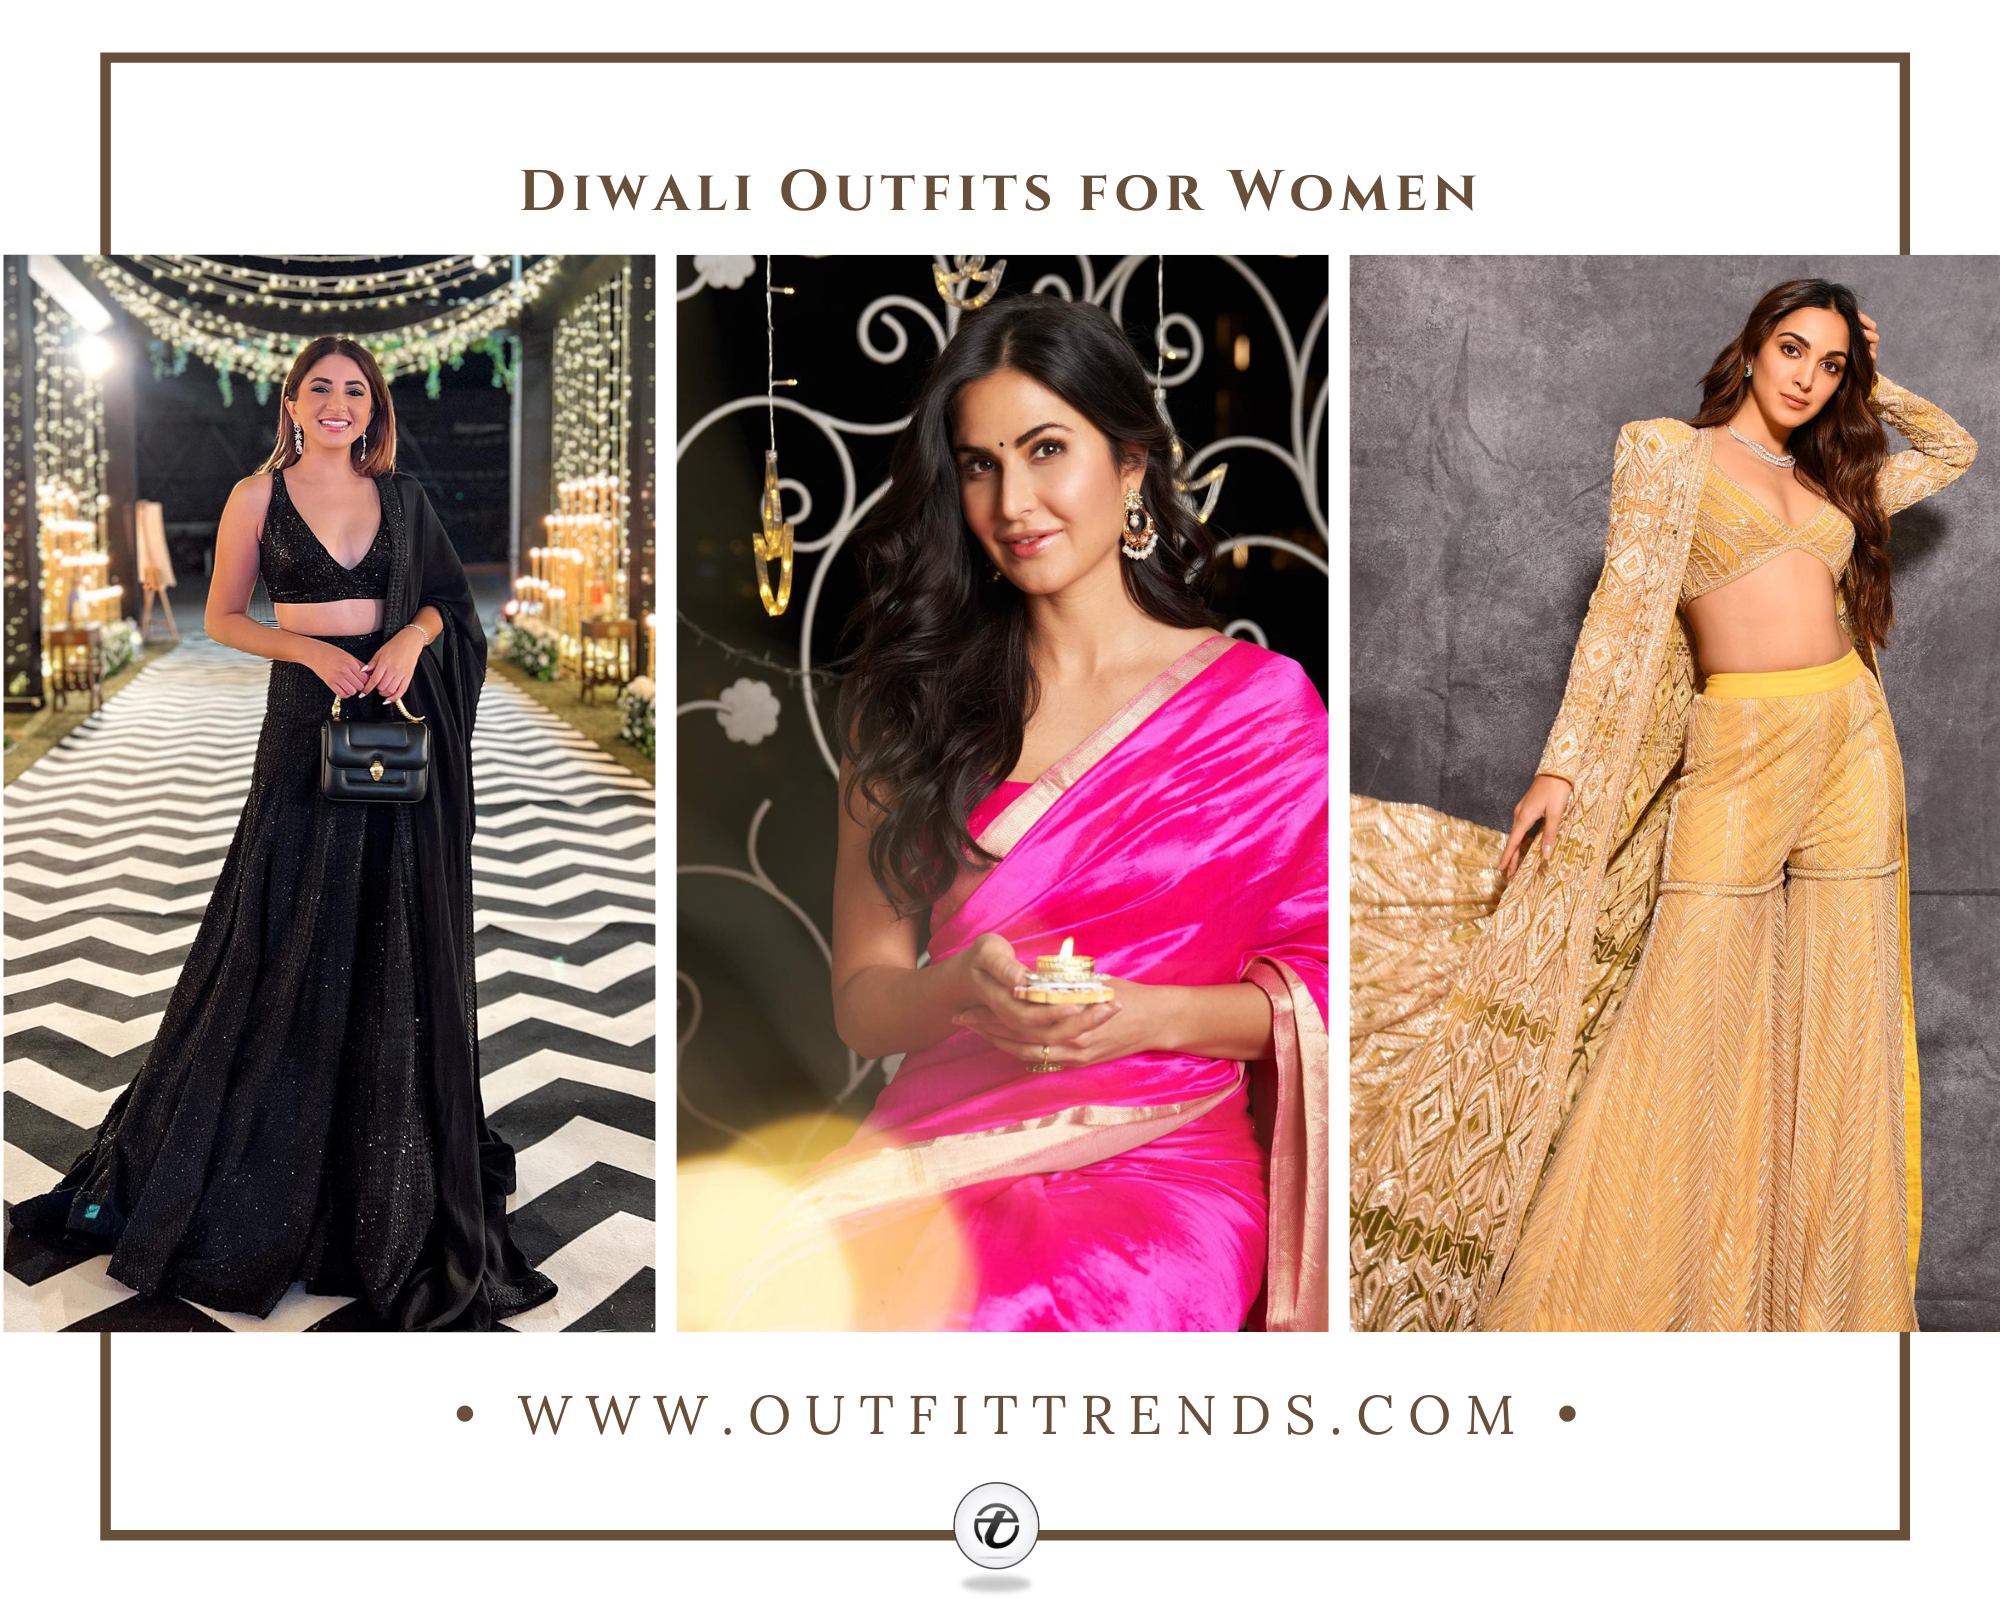 diwali outfits for women 4